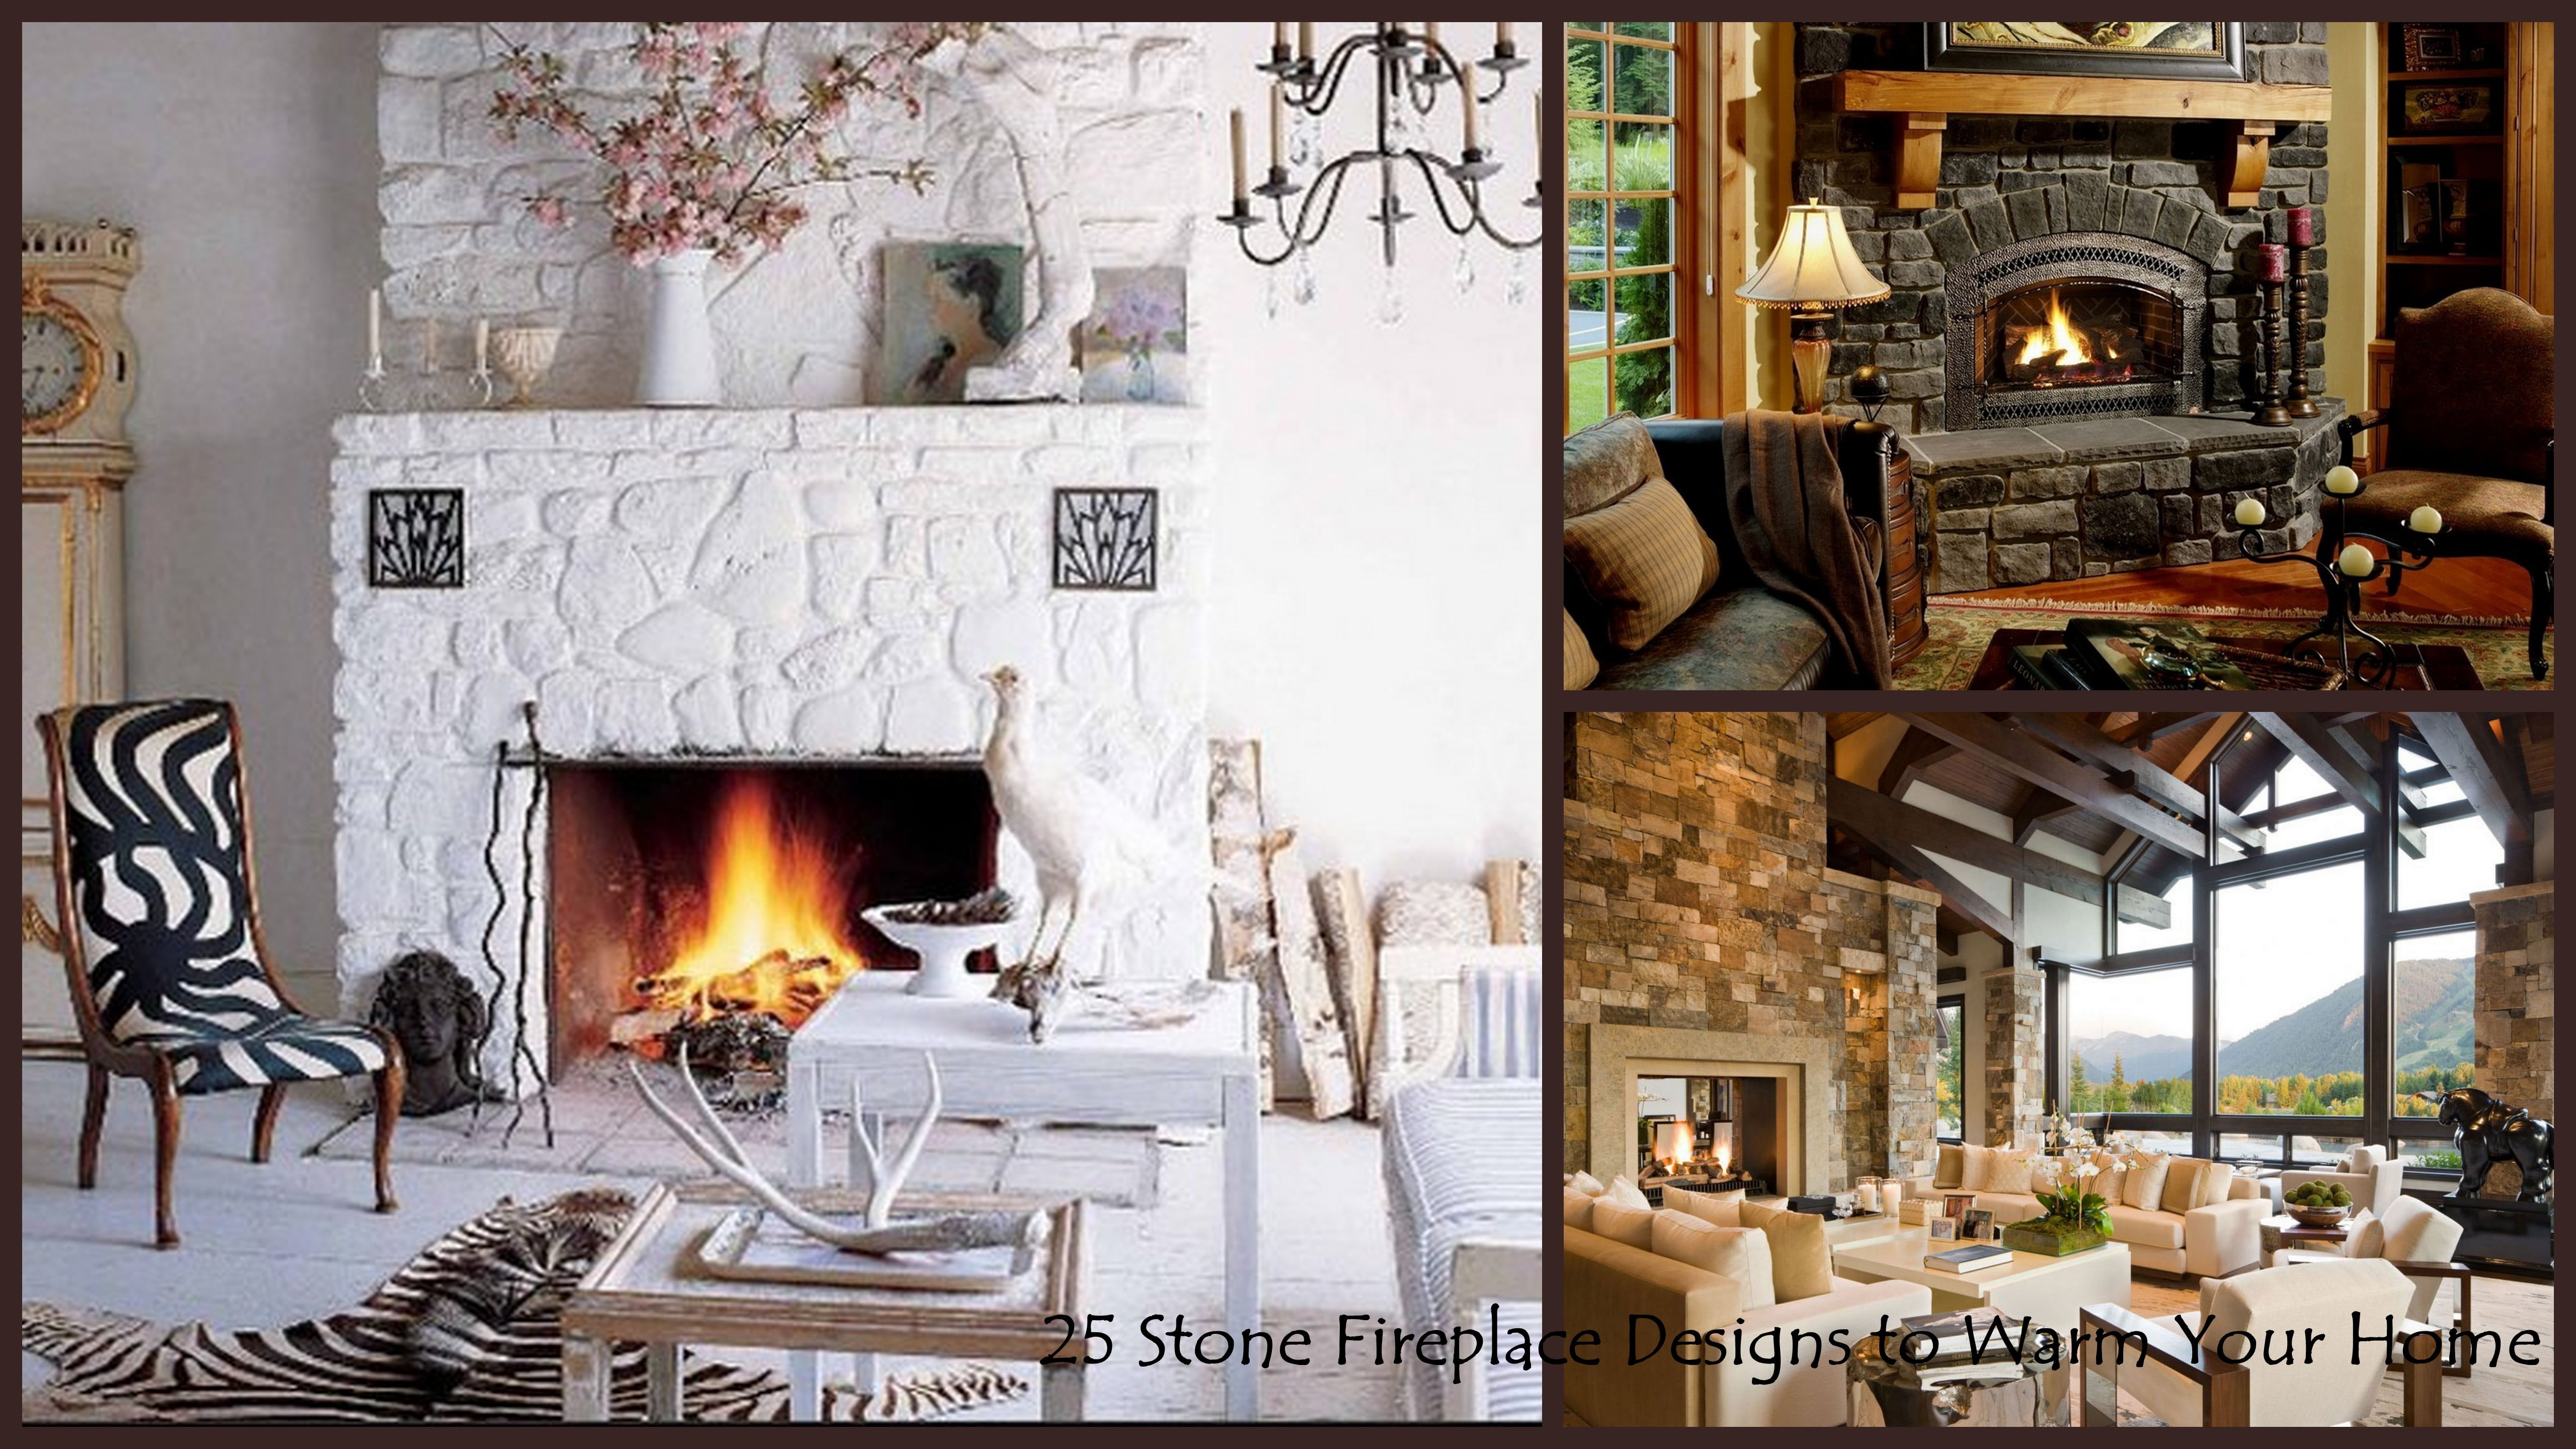 25 Stone Fireplace Designs to Warm your Home 10